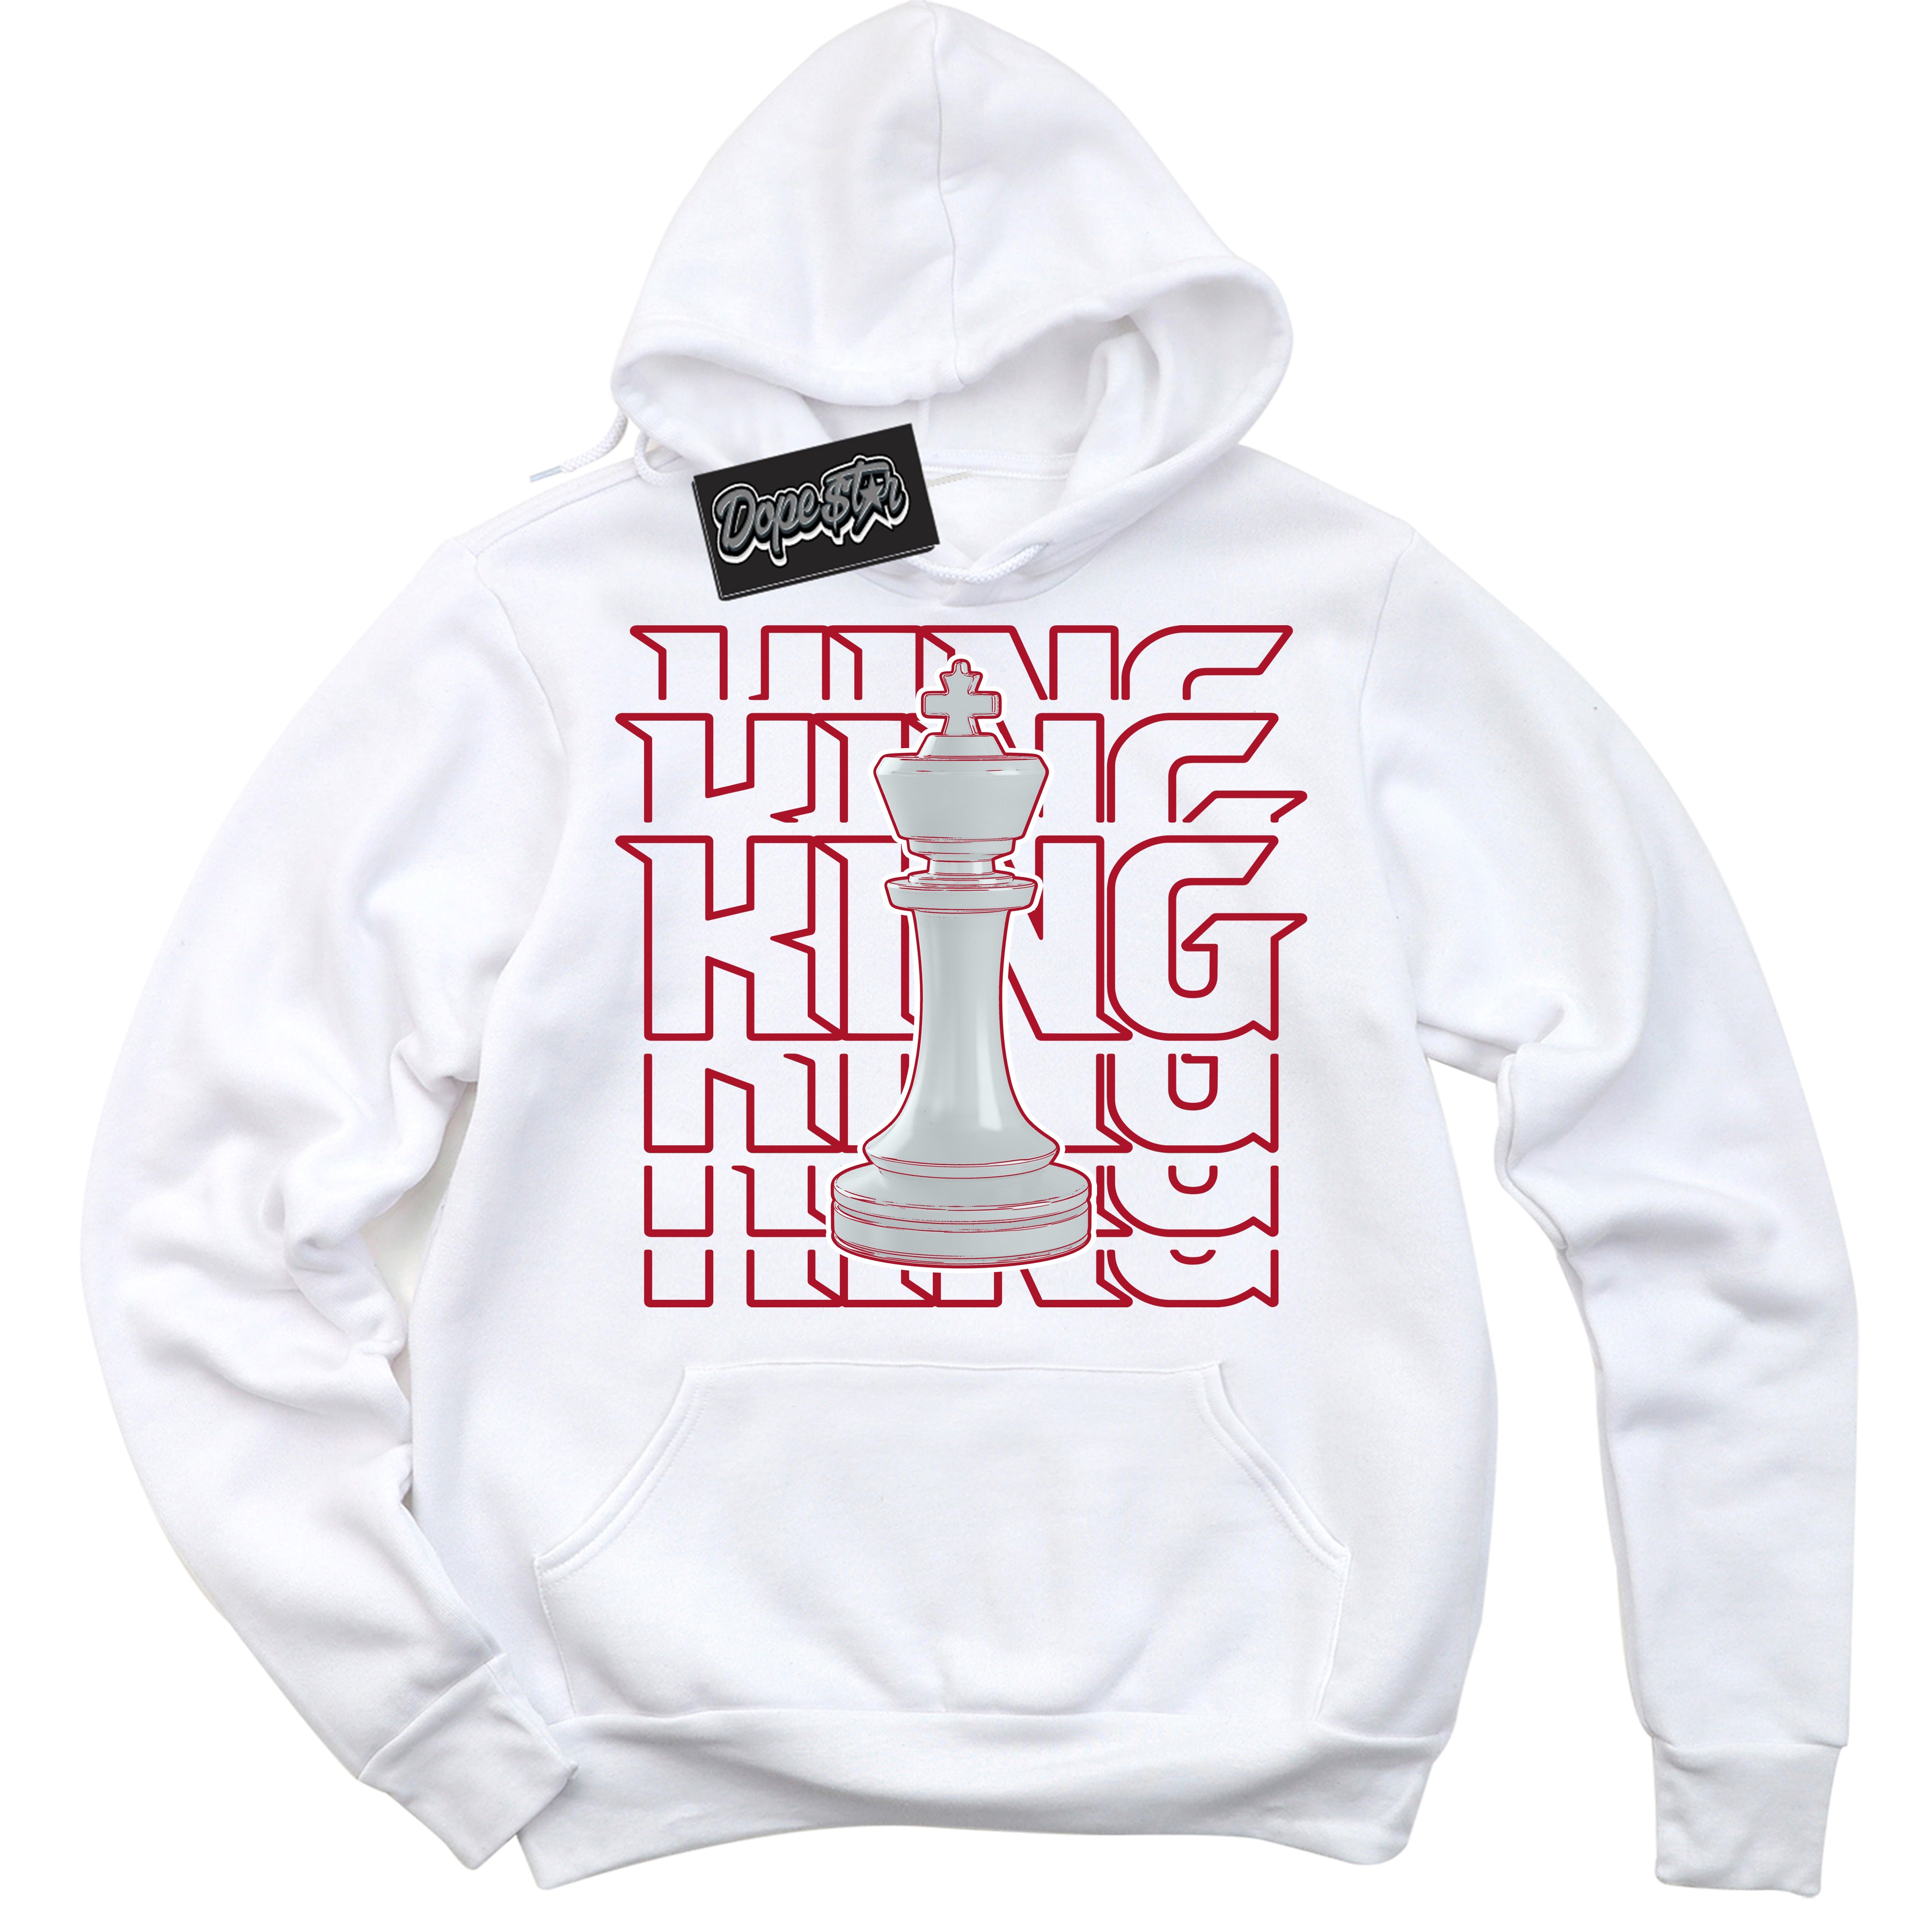 Cool Black Hoodie with “ King Chess ”  design that Perfectly Matches  Reverse Ultraman Sneakers.